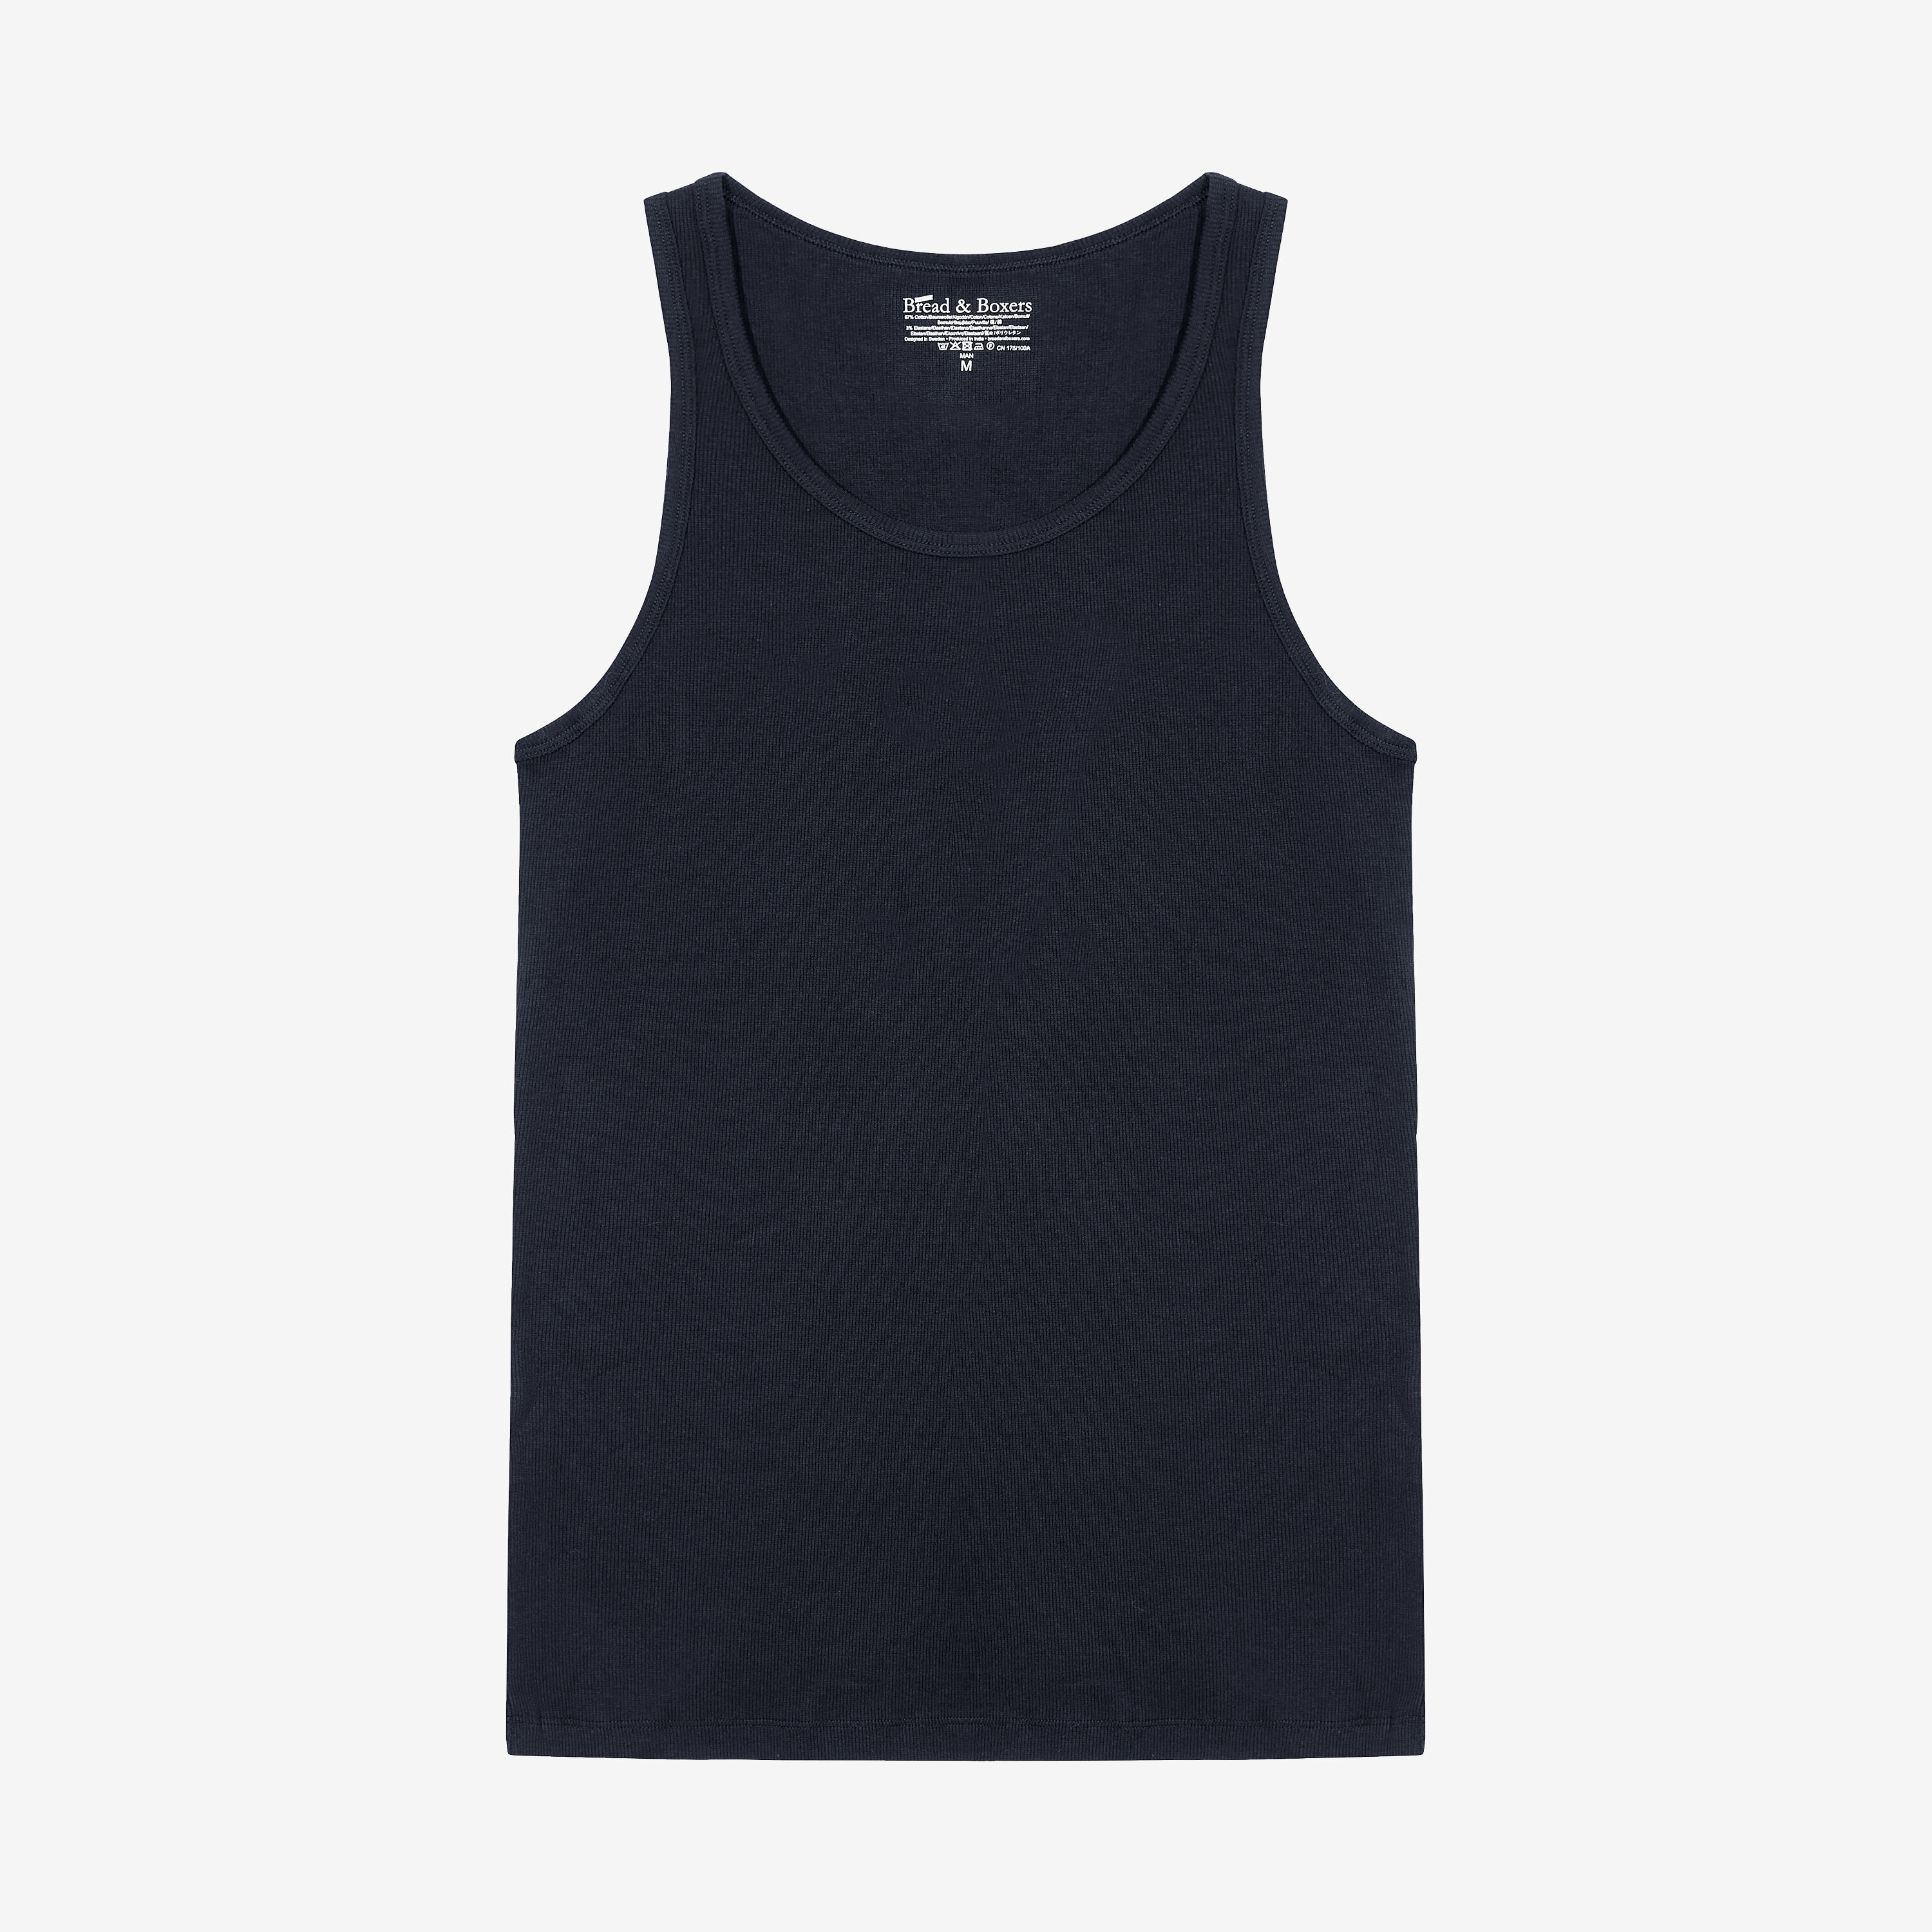 Men's black ribbed tank top made of organic cotton - Bread & Boxers